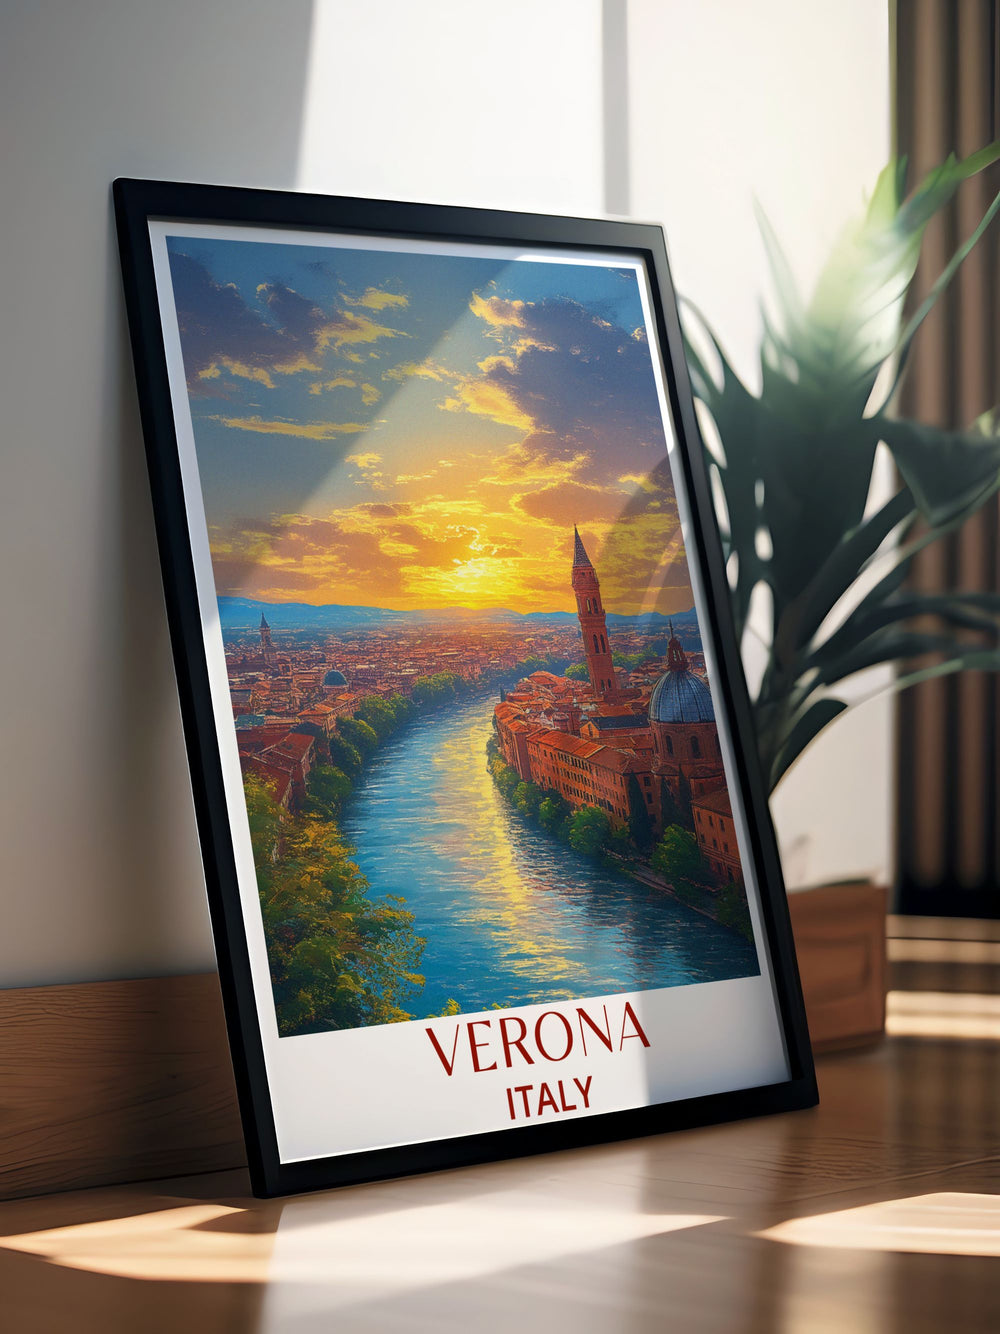 Vibrant Castel San Pietro artwork depicting the timeless elegance of this historic Verona landmark ideal for adding a touch of Italian art to any home decor or as a thoughtful Italy travel gift for friends and family who love Verona.